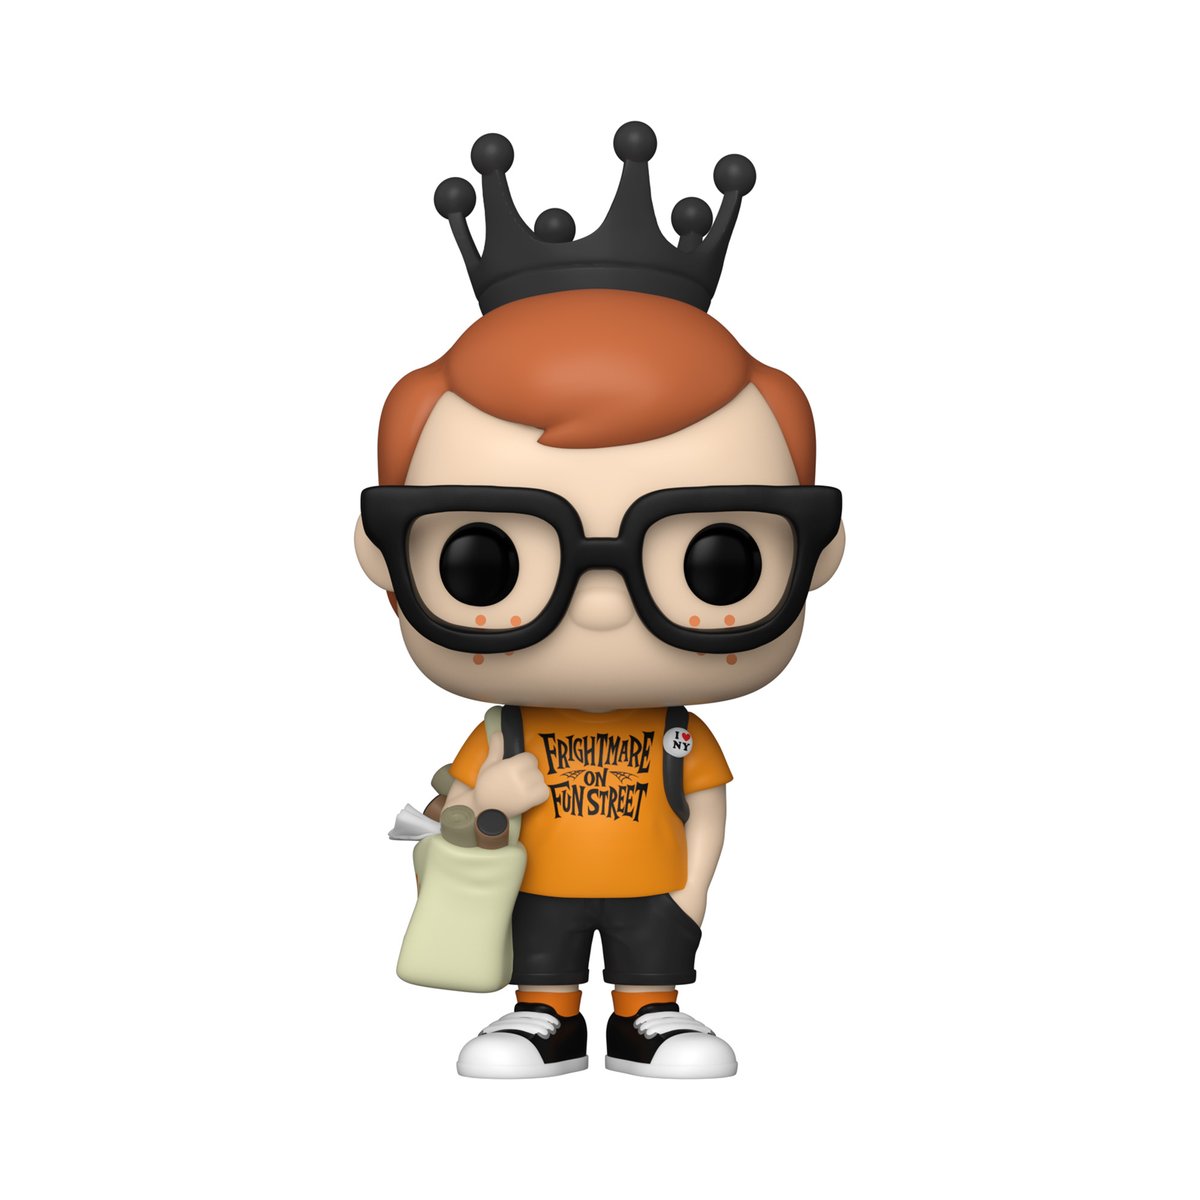 RT, follow @OriginalFunko, and comment below with your favorite Halloween movie for the chance to WIN our exclusive Frightmare on Fun Street Freddy Funko POP! #Funko #FunkoPOP #Giveaway #Halloween